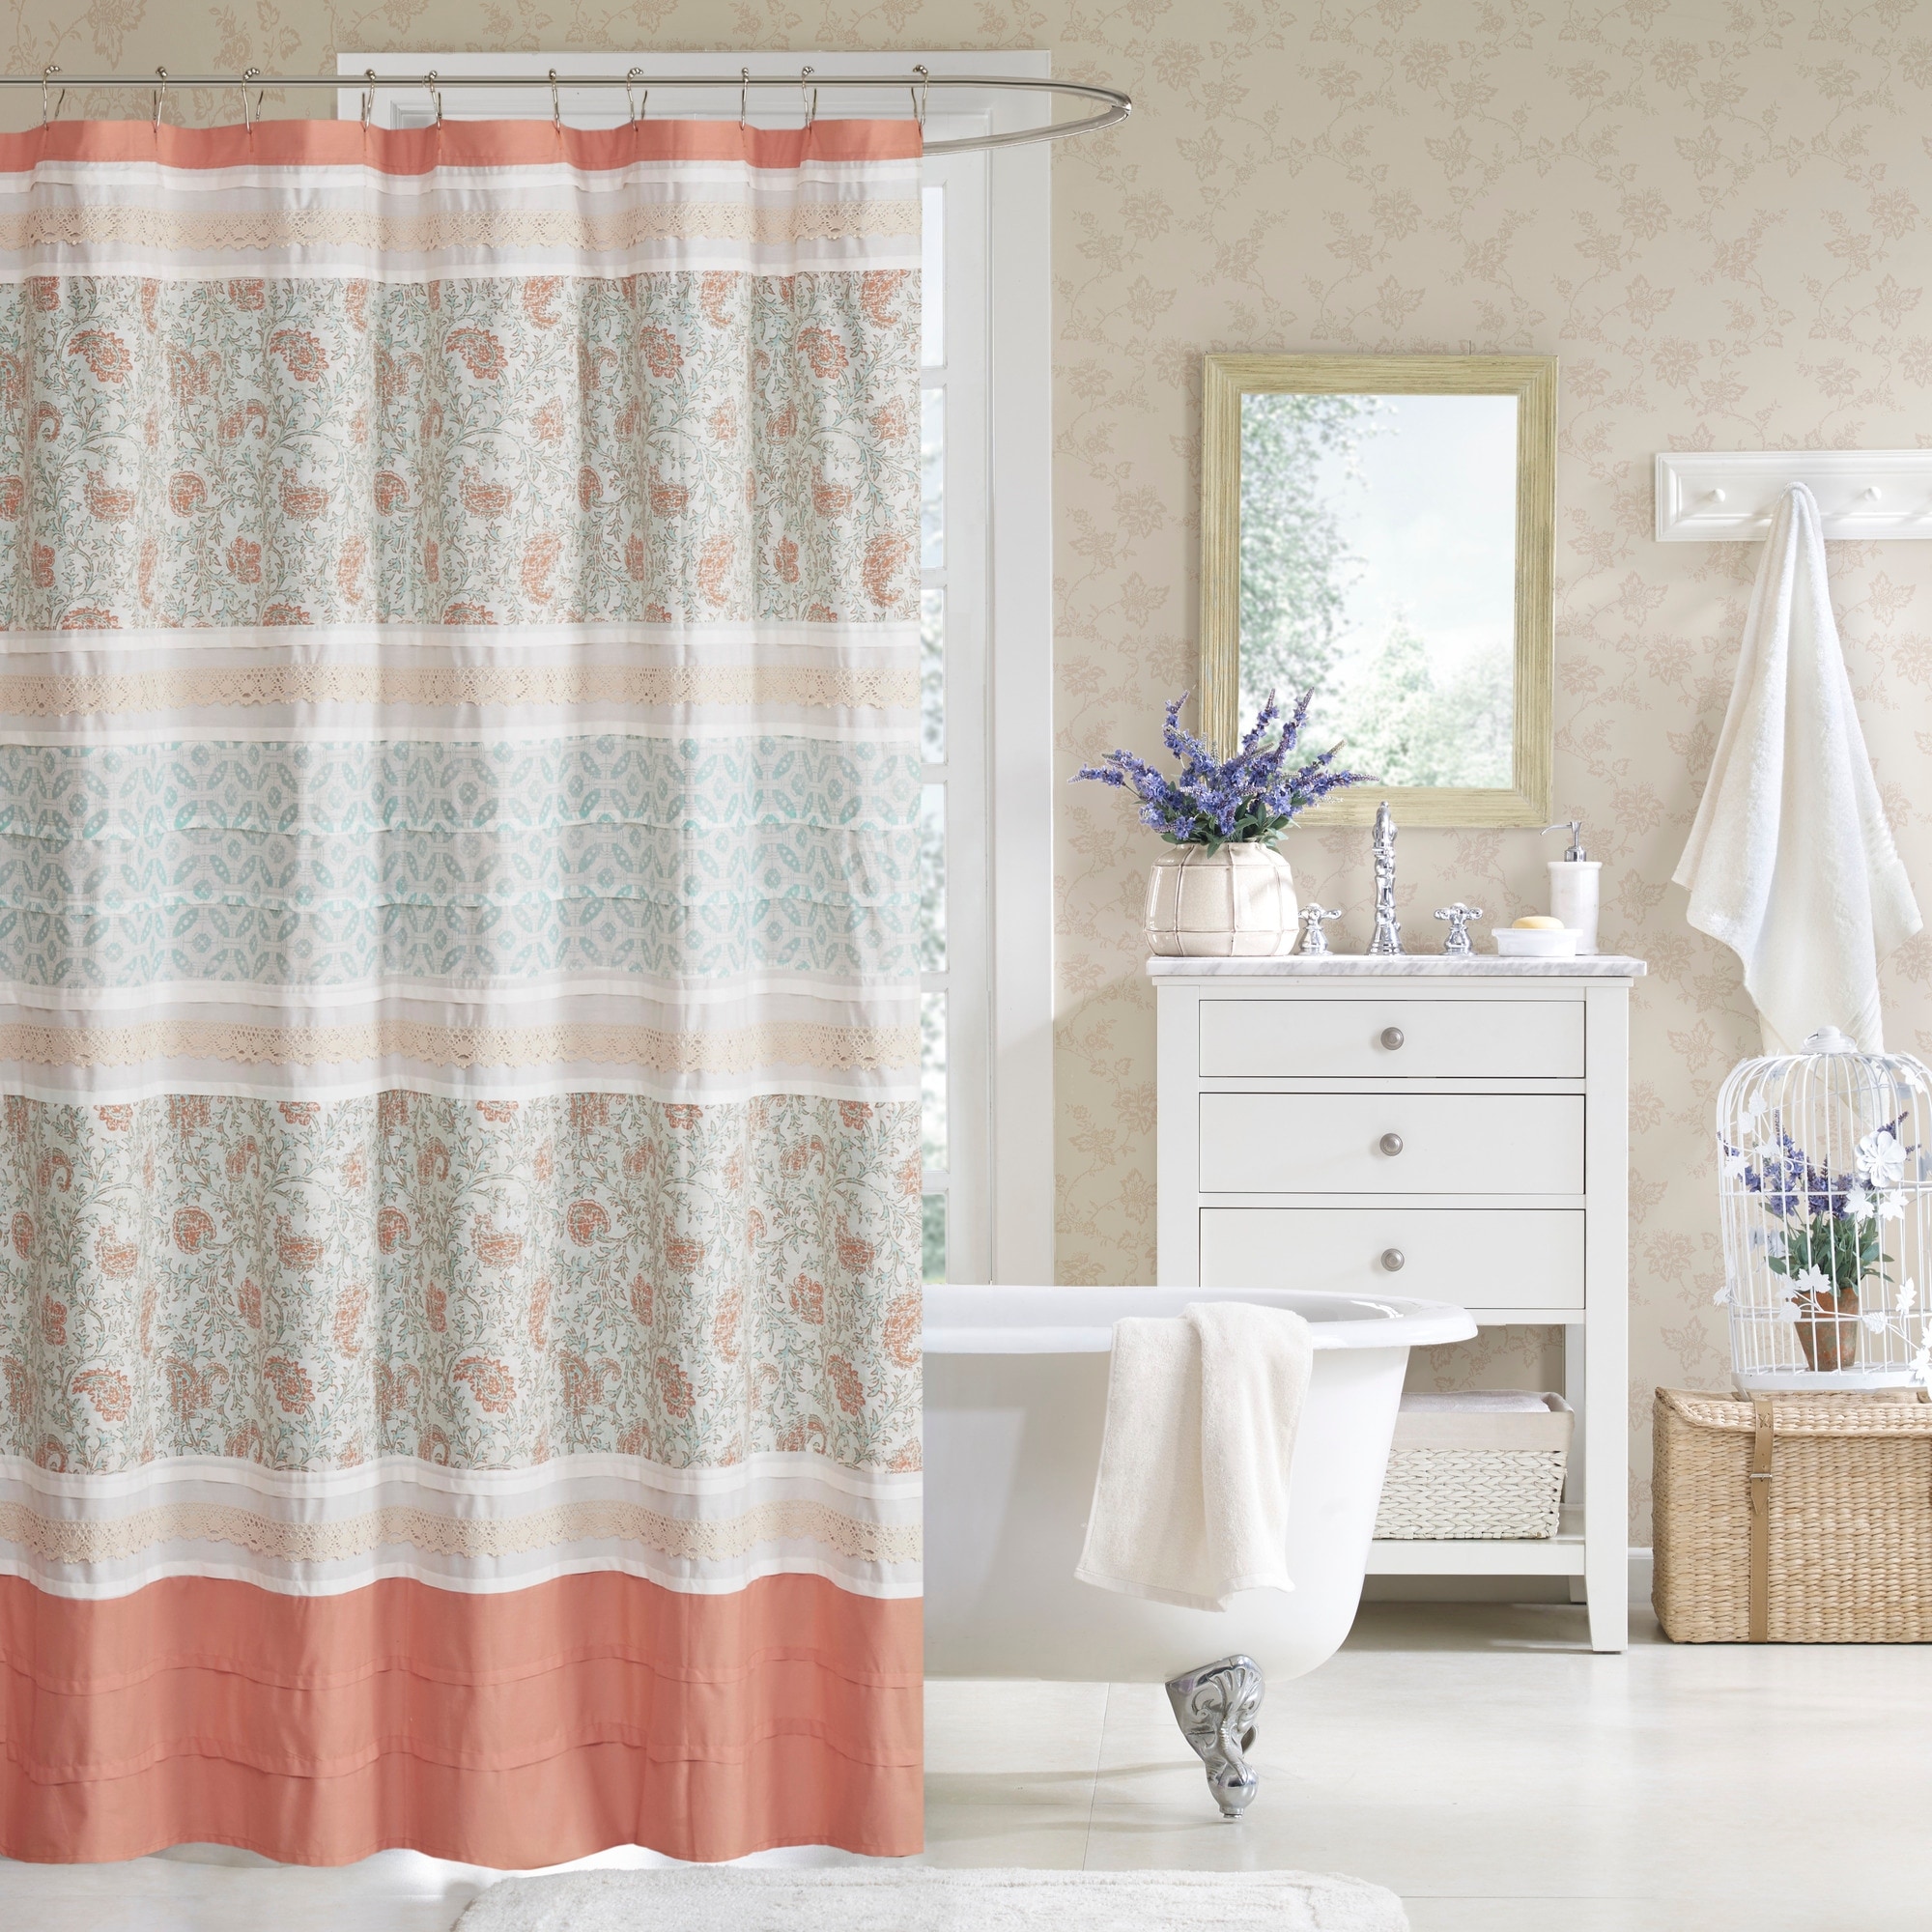 https://ak1.ostkcdn.com/images/products/is/images/direct/d2e5b153fddf822ddcee1a81e31770a877c22a88/Copper-Grove-Aleza-Cotton-Shower-Curtain.jpg